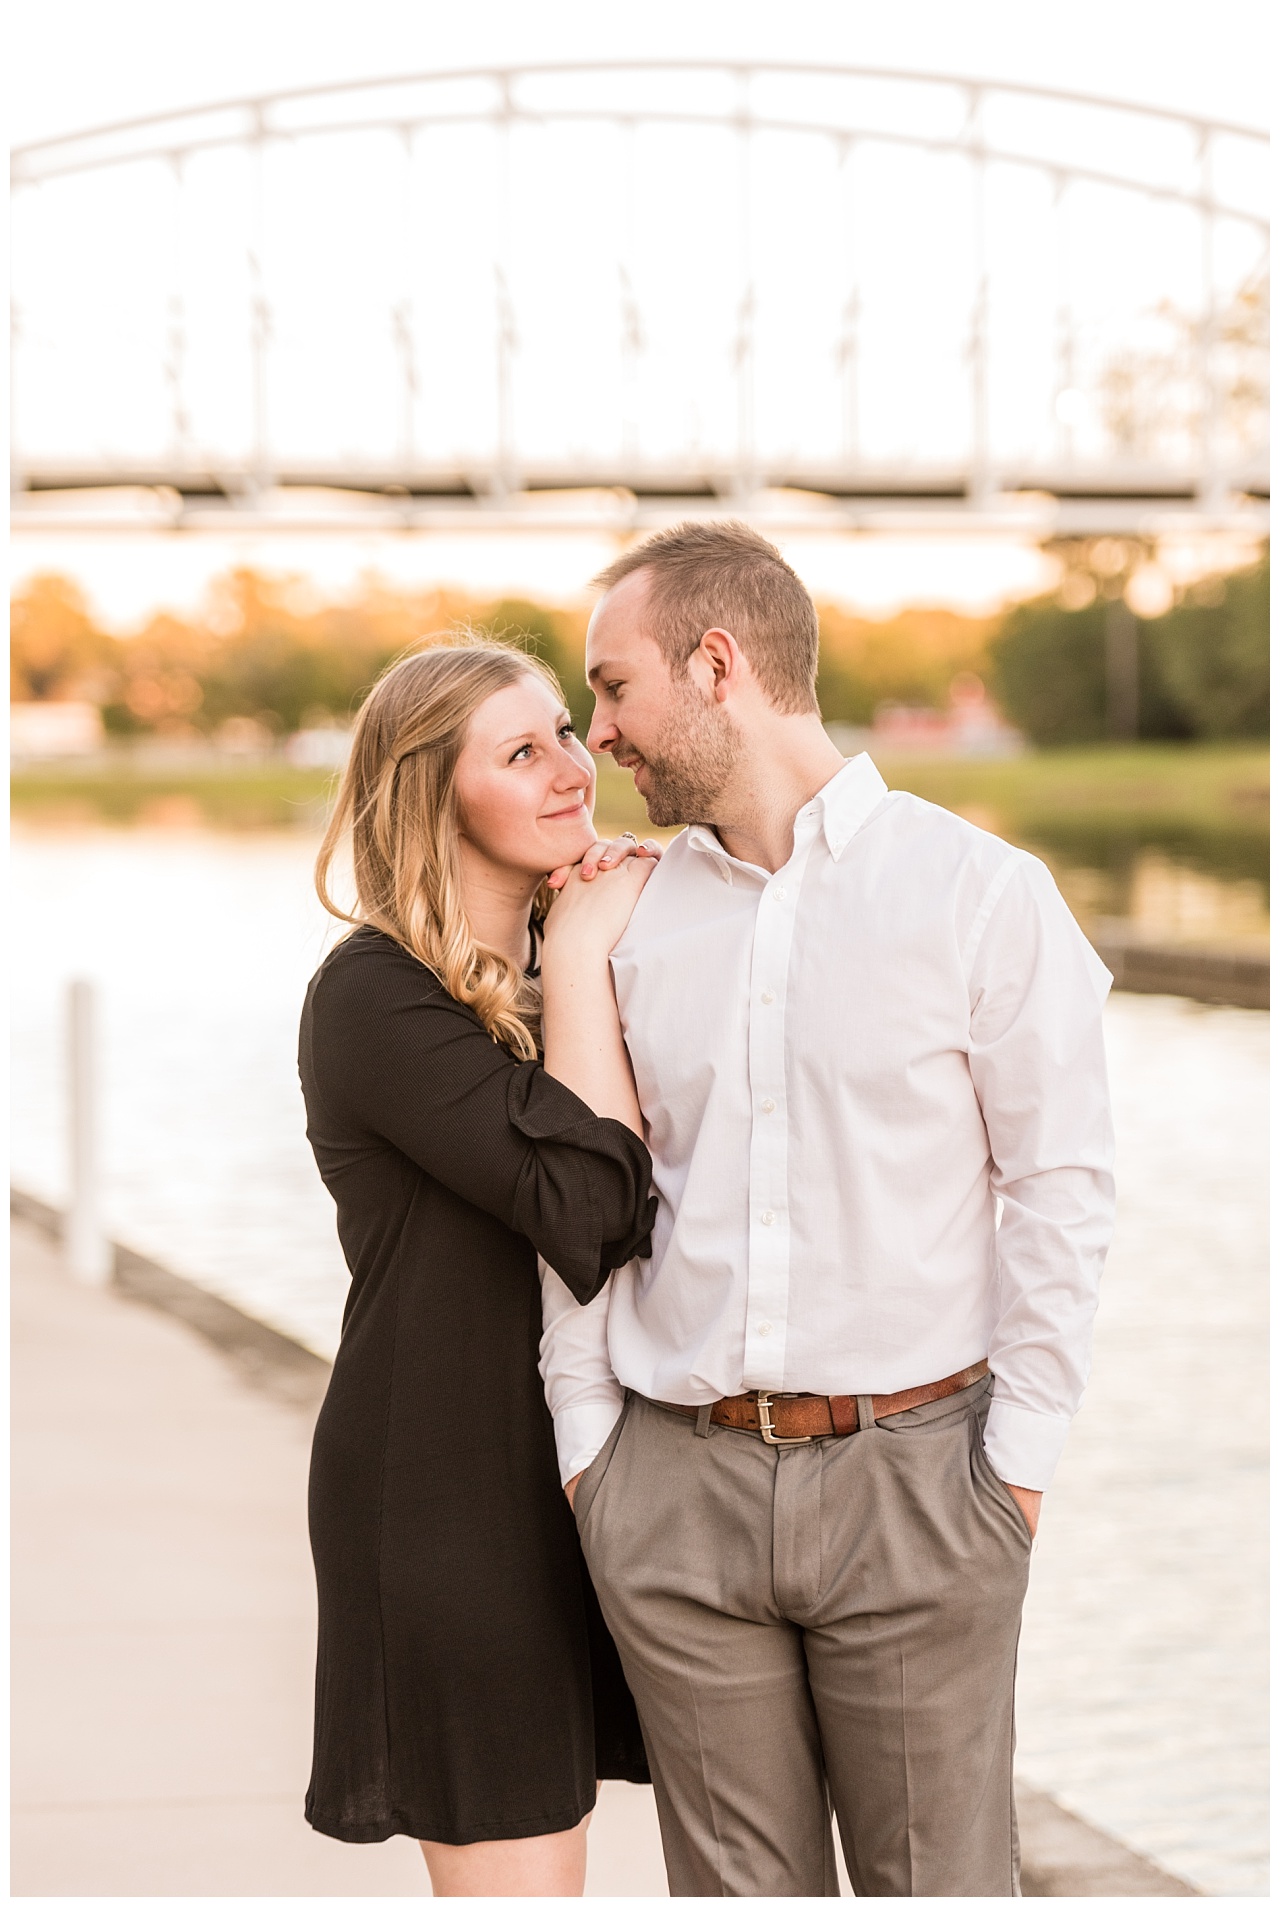 The Woodlands Texas Engagement Session_2017-11-02_0026